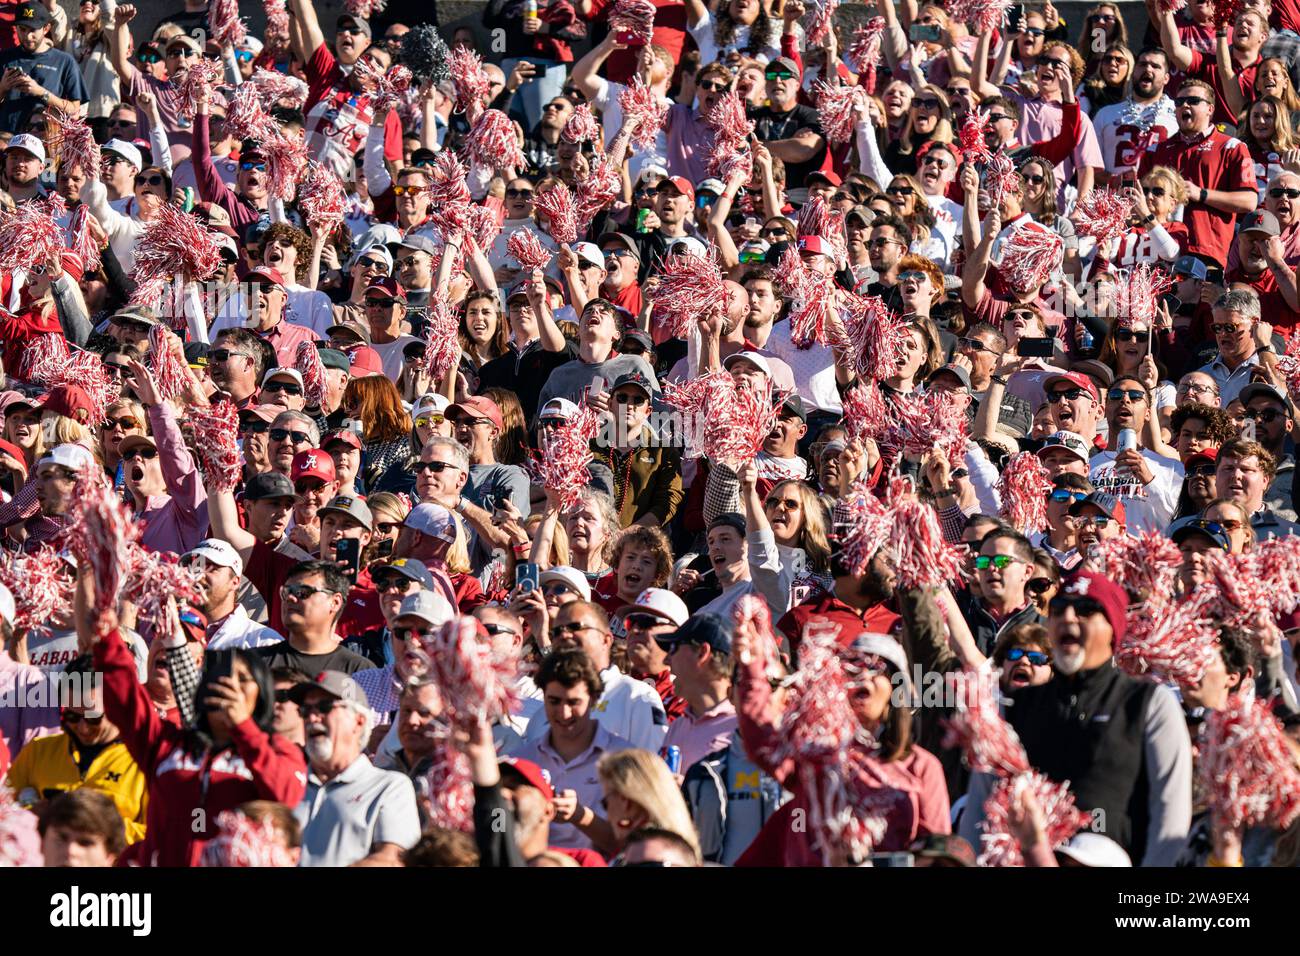 Alabama Crimson Tide fans during the CFP Semifinal at the Rose Bowl Game between the Alabama Crimson Tide and Michigan Wolverines, Monday, January 1, Stock Photo